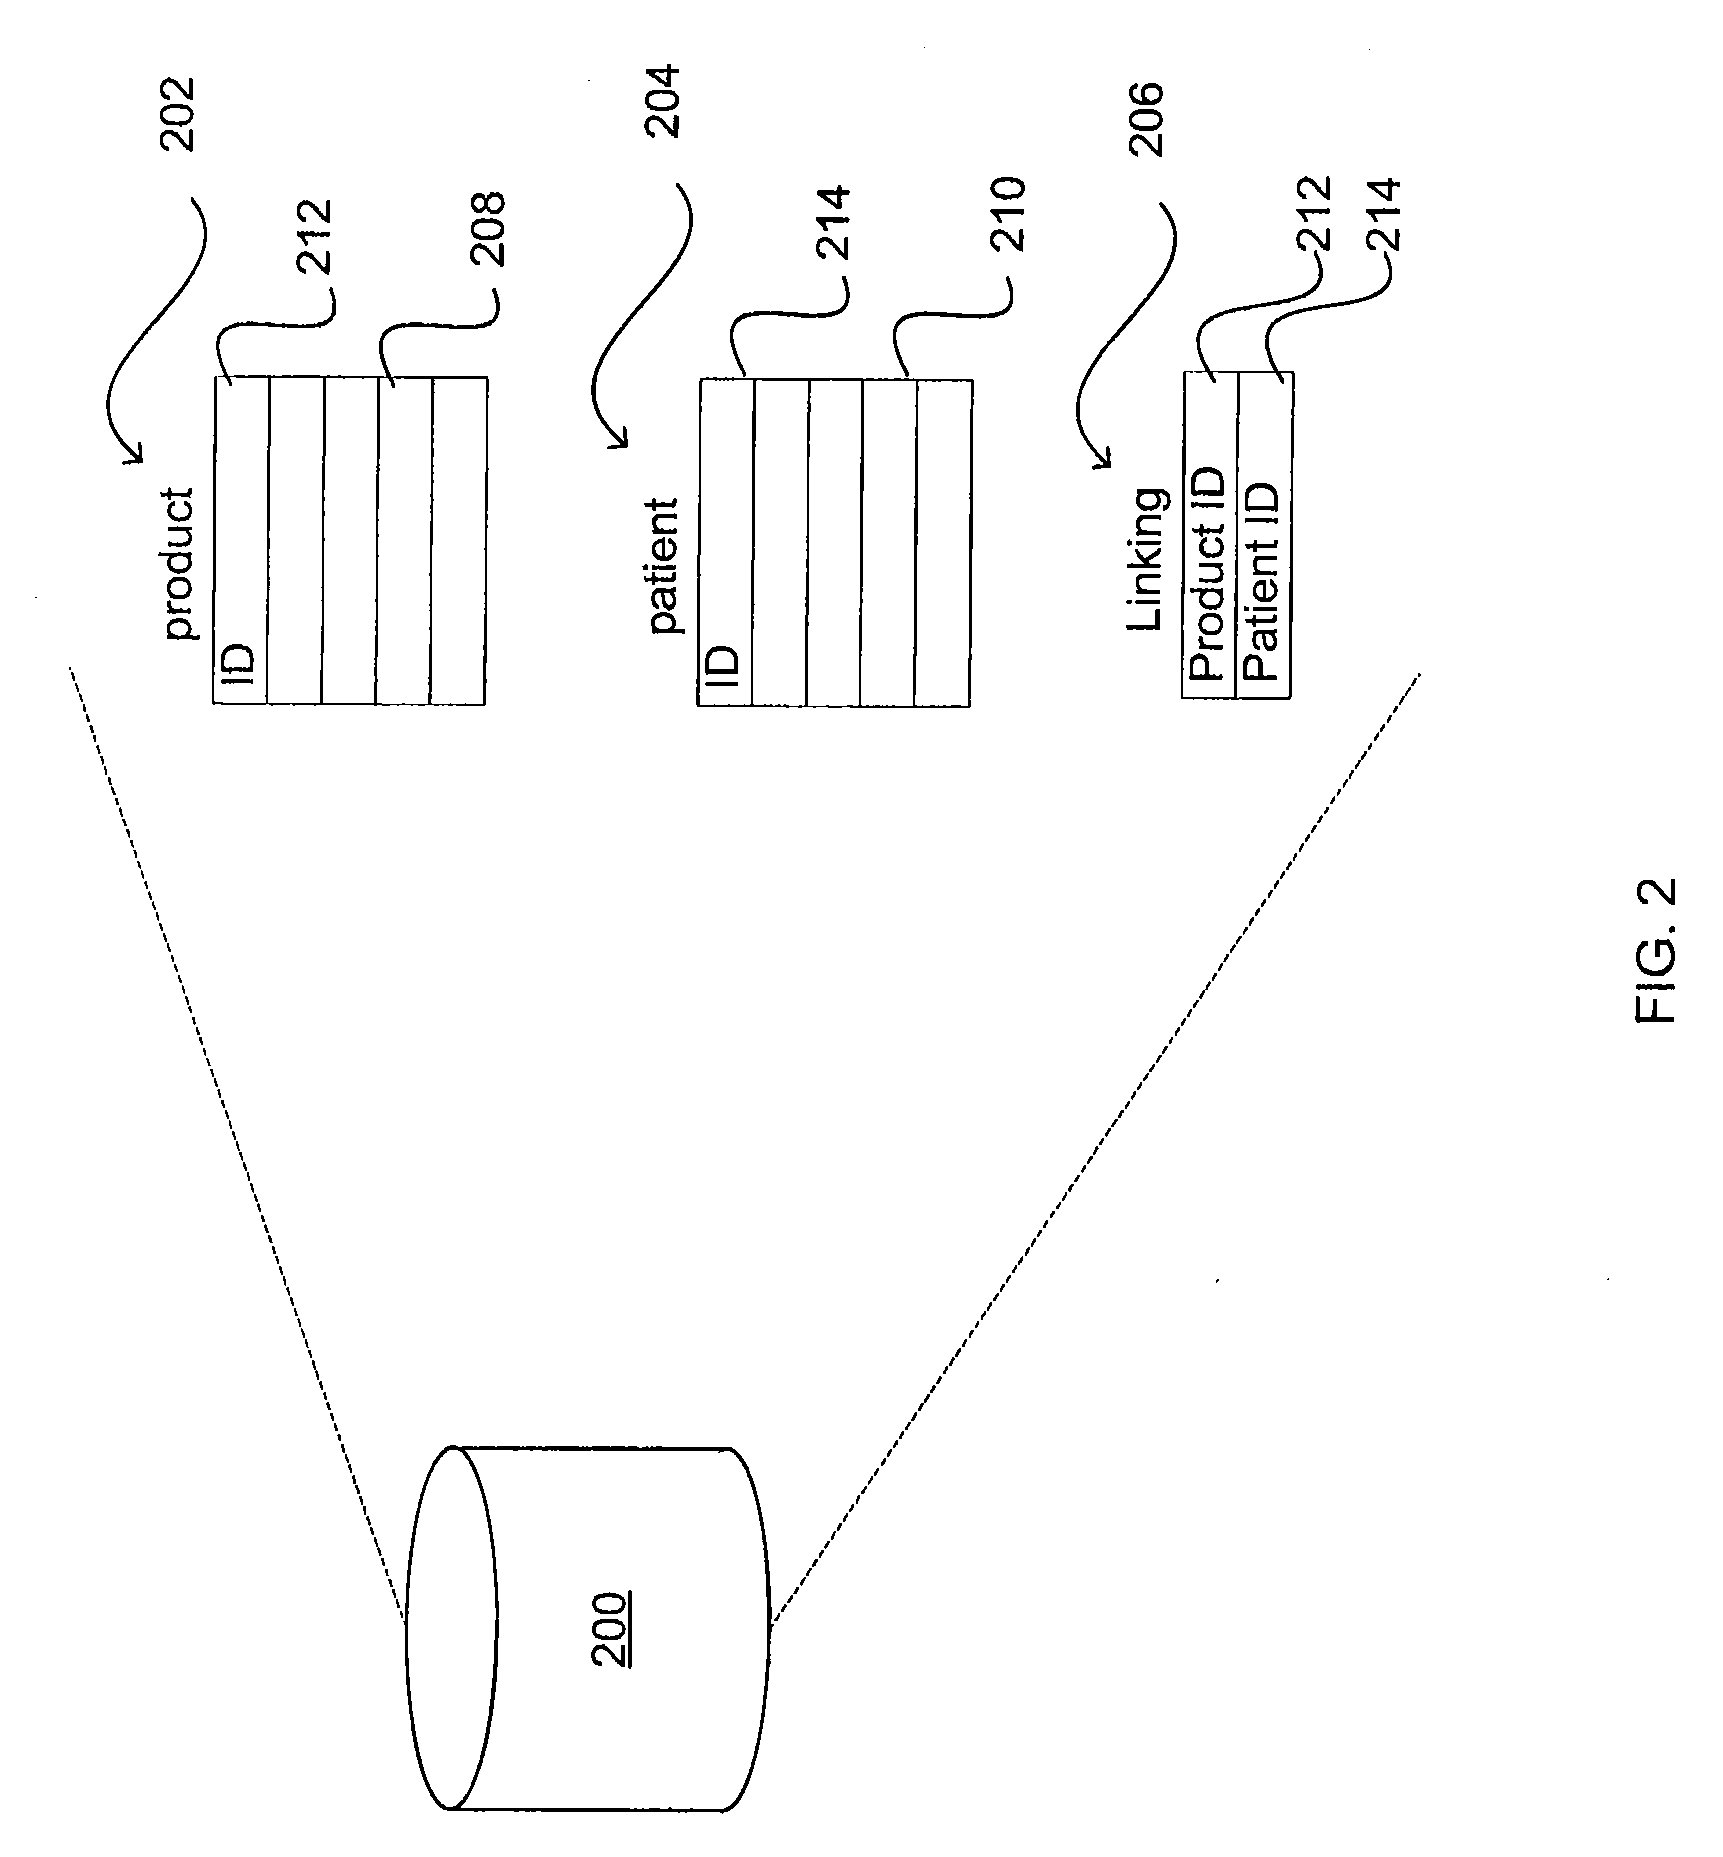 System and method for adding and tracking product information to a patient record